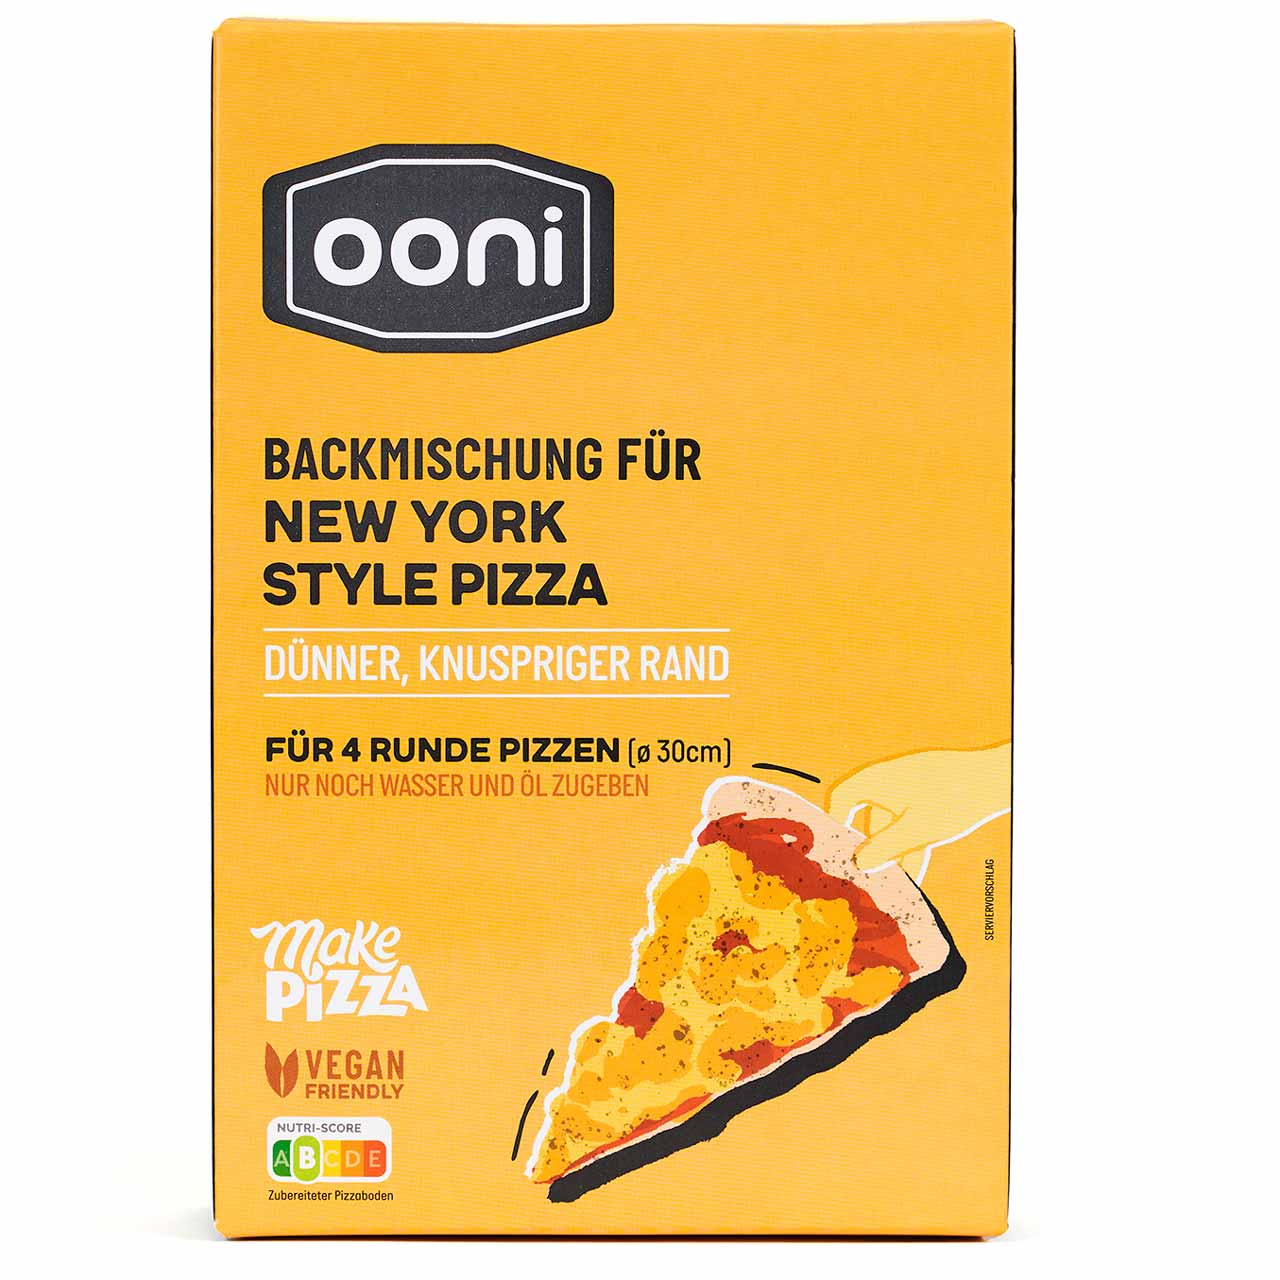 Ooni Backmischung New York Style Pizza